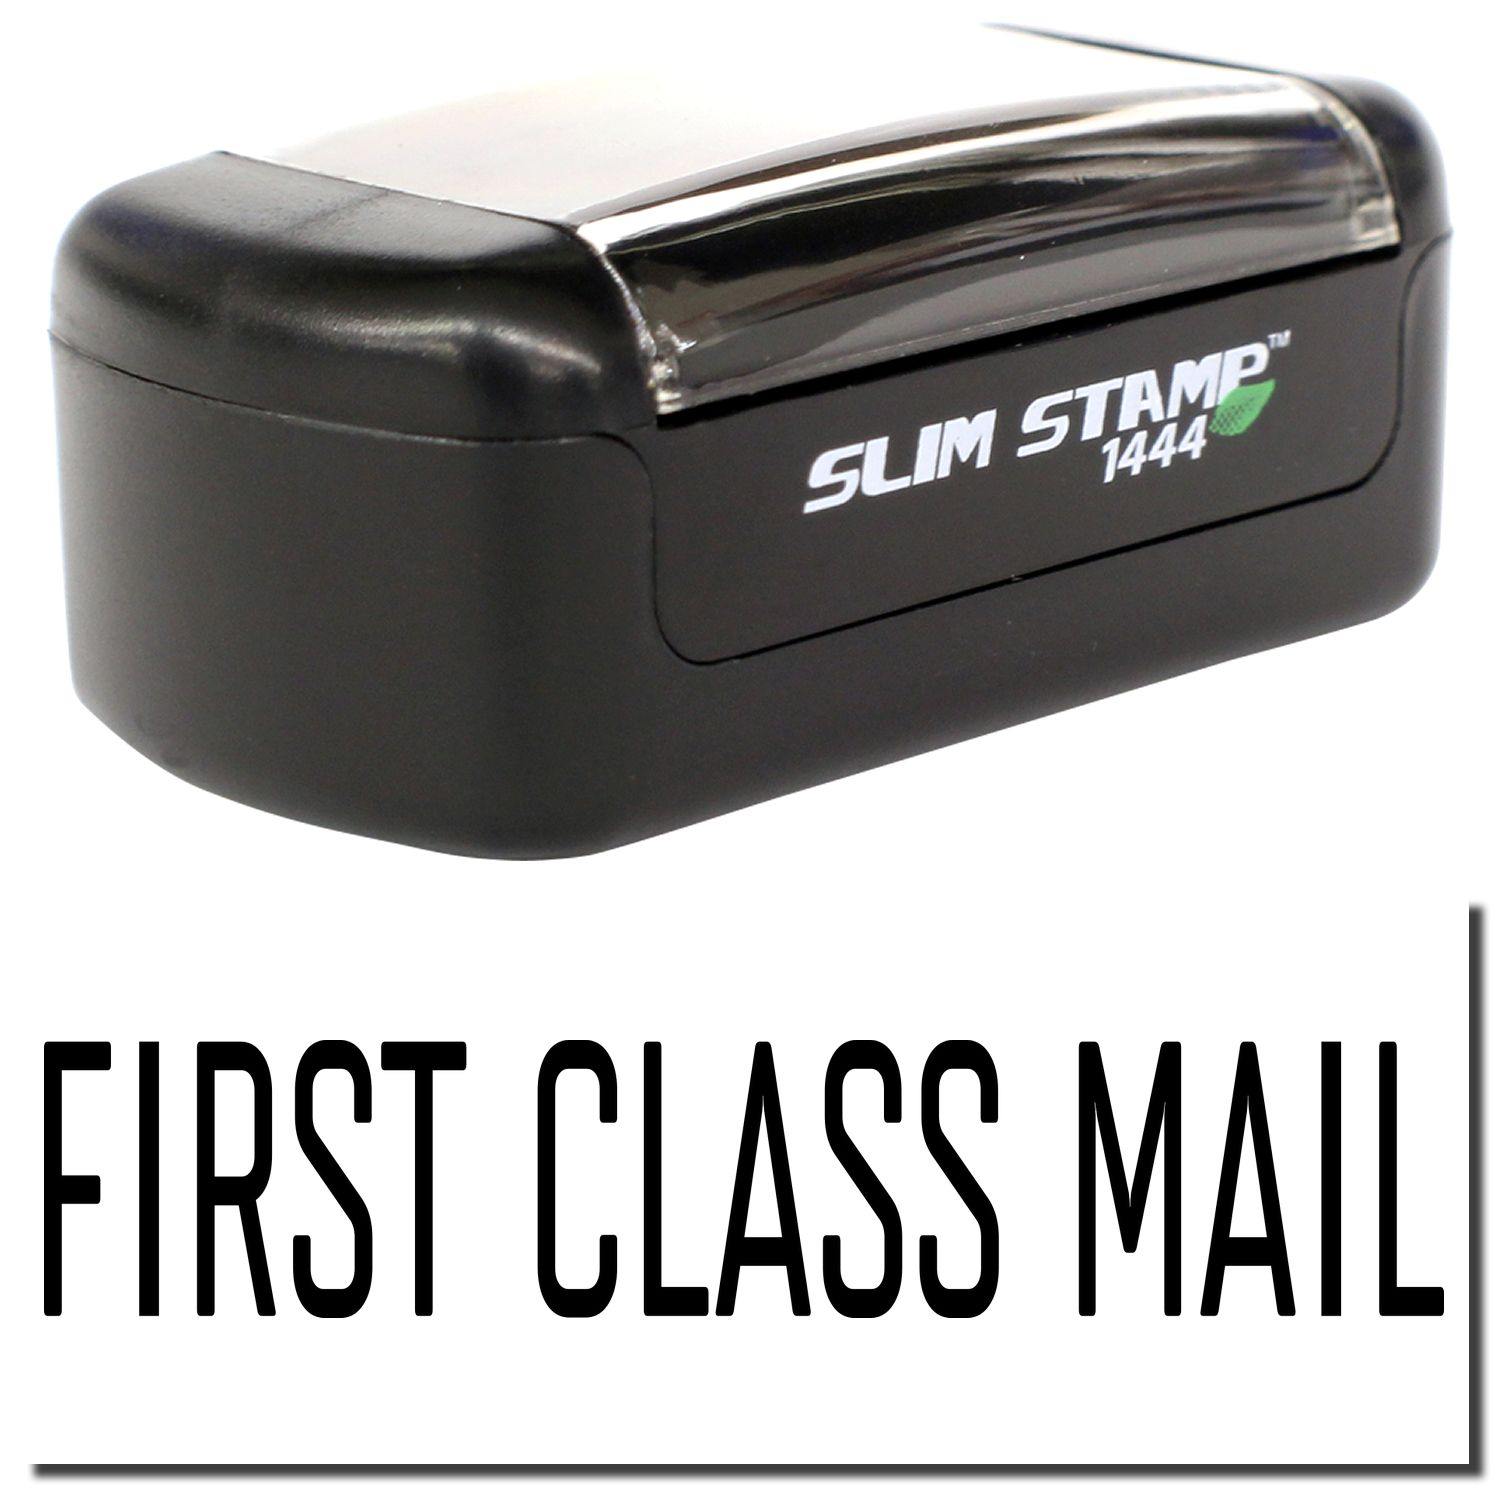 A stock office pre-inked stamp with a stamped image showing how the text "FIRST CLASS MAIL" in a narrow font is displayed after stamping.